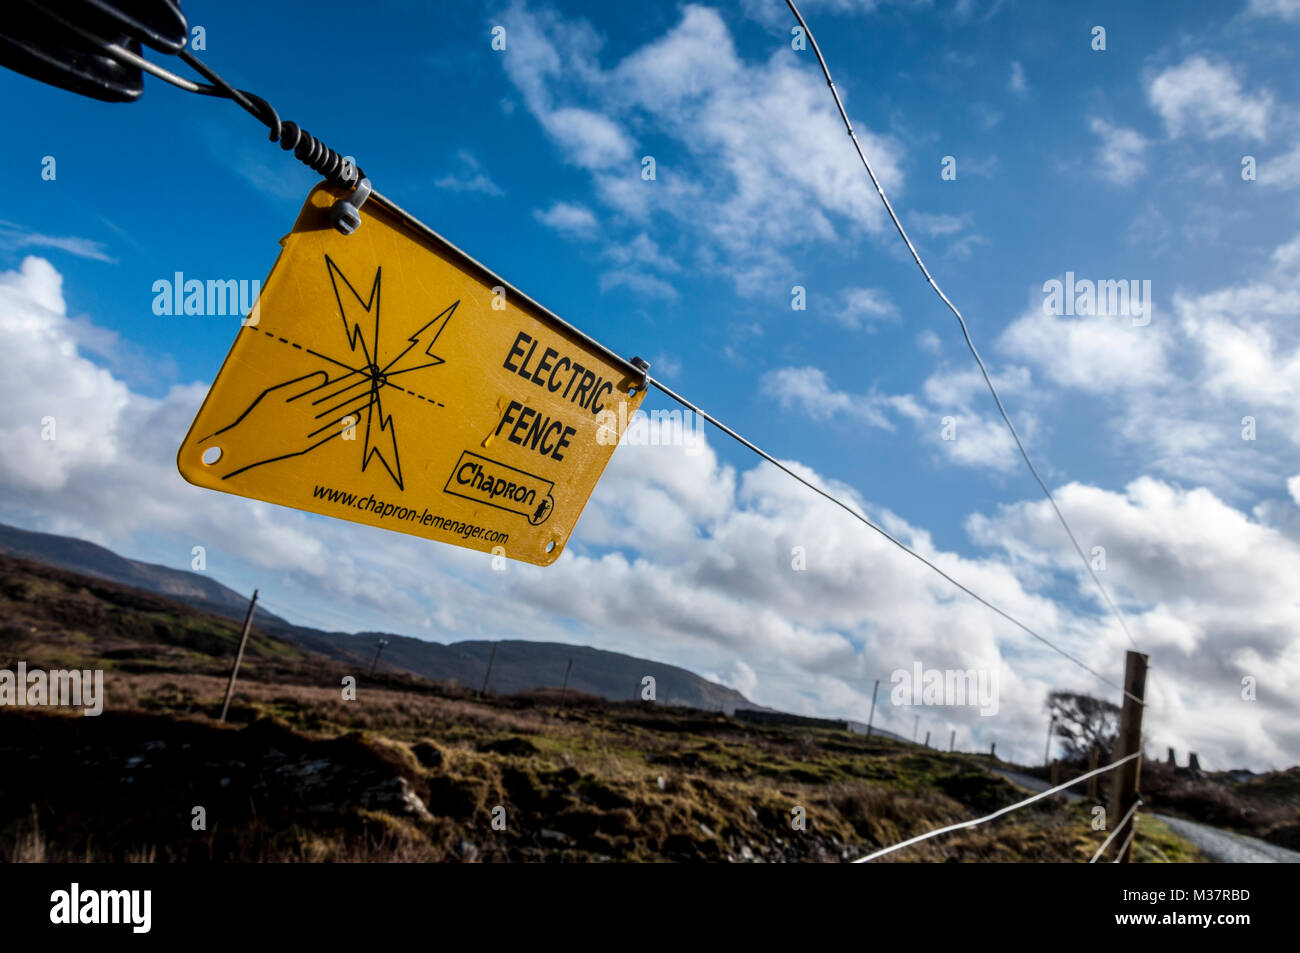 Electric fence Chapron lemenager signage warning for safety in rural Ireland Stock Photo